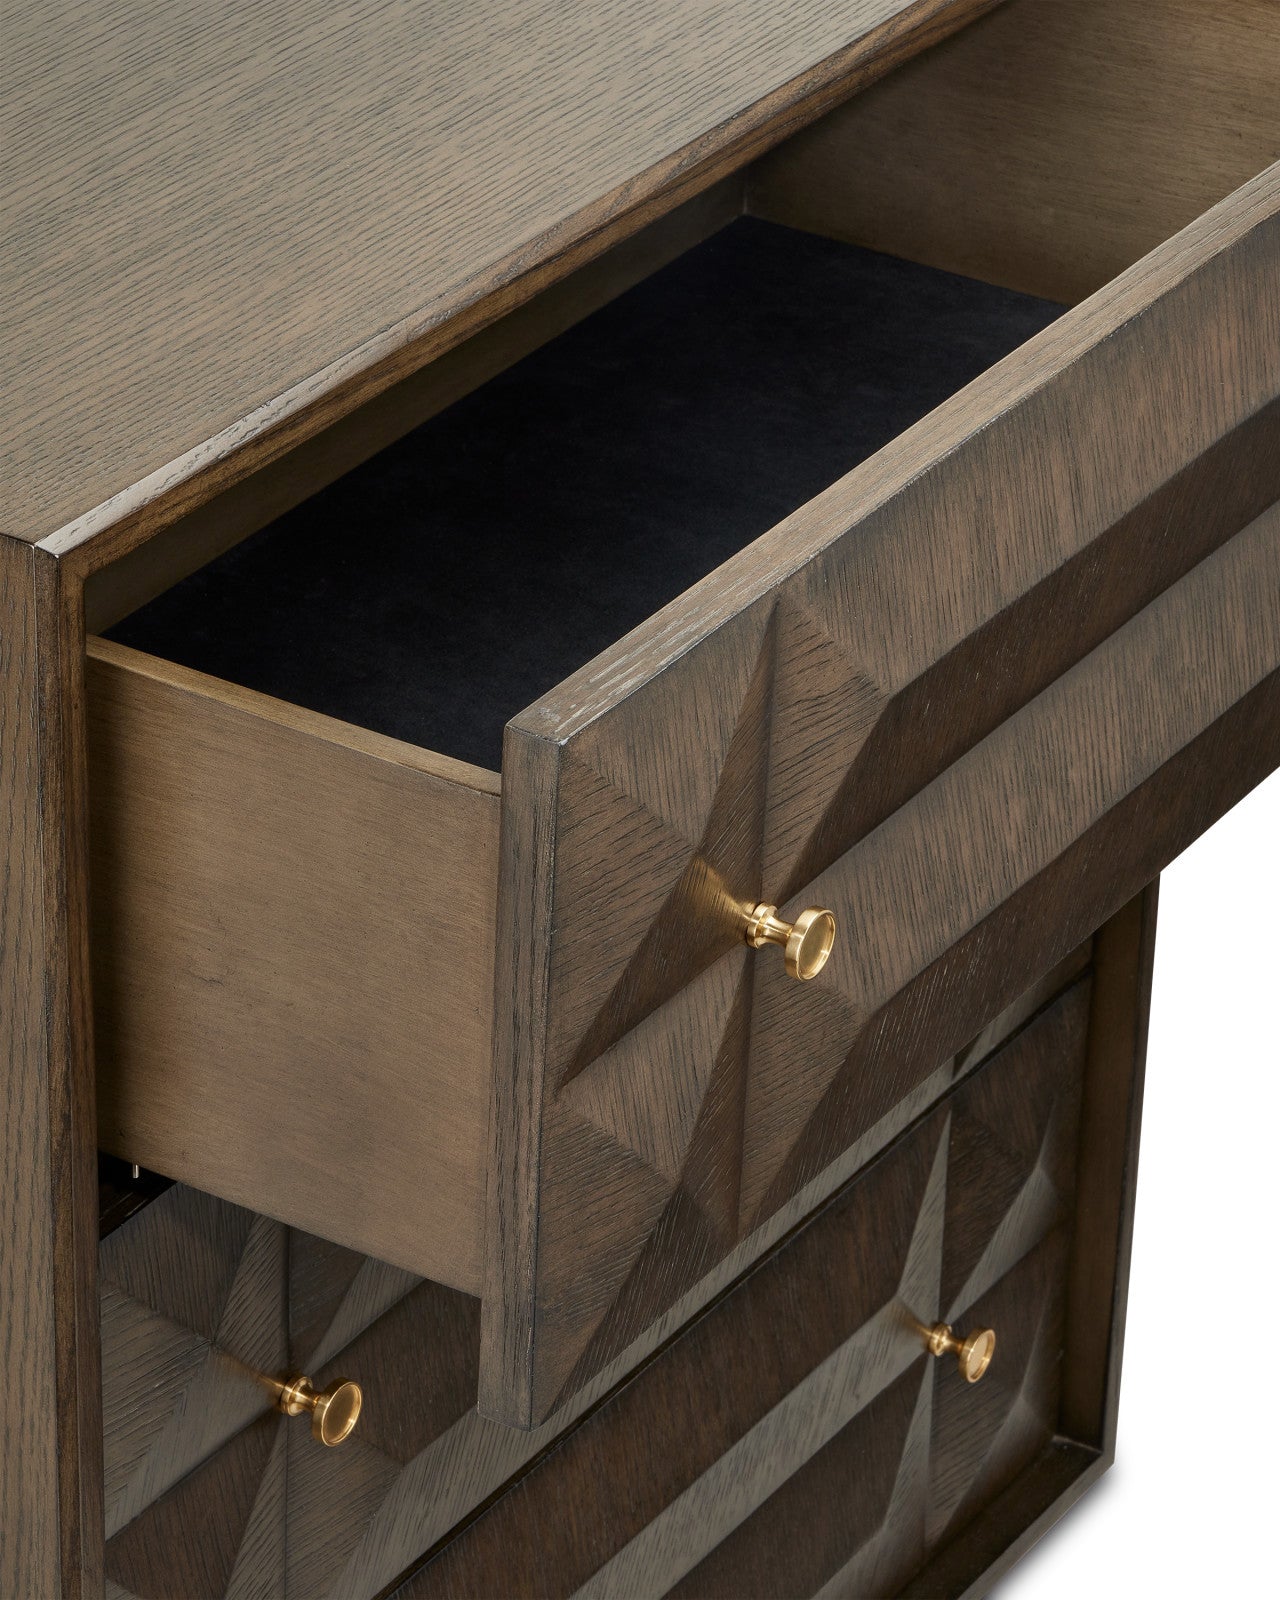 Kendall Dove Gray Chest by Currey & Co.